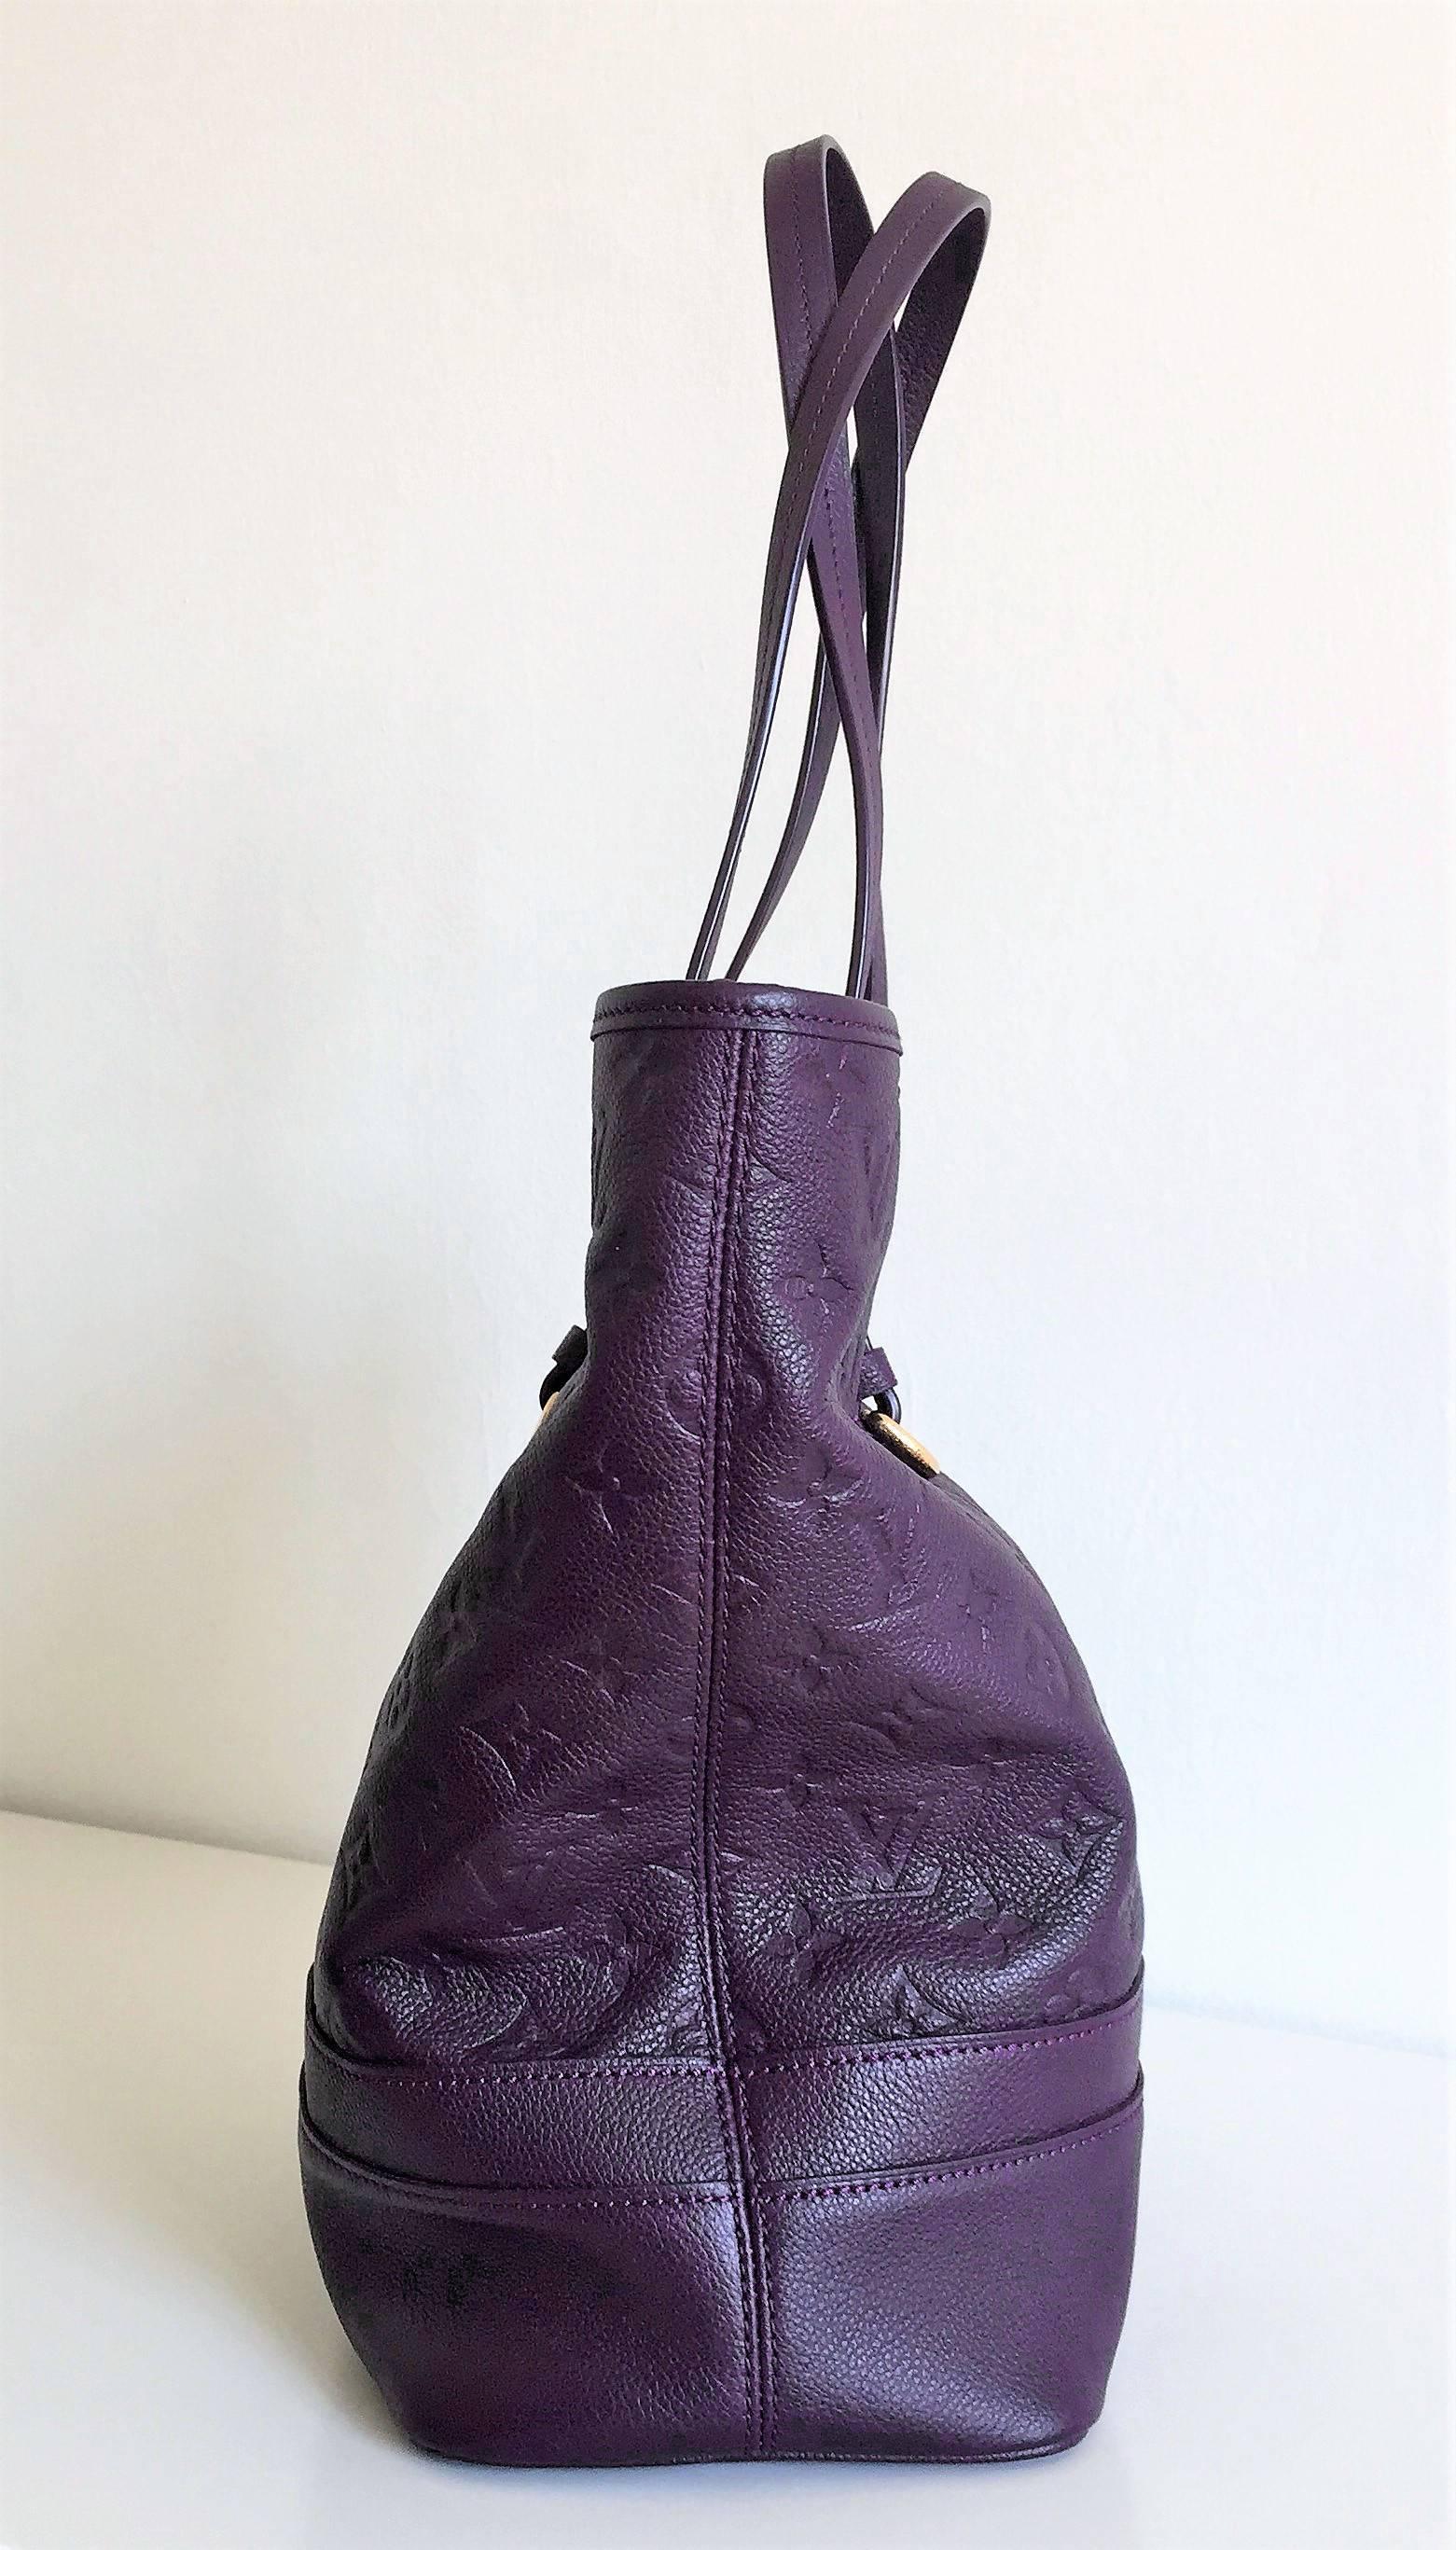 Louis Vuitton Purple Shuolder Bag Citadines PM in LV monogram Empreinte Leather In Excellent Condition For Sale In Milan, IT